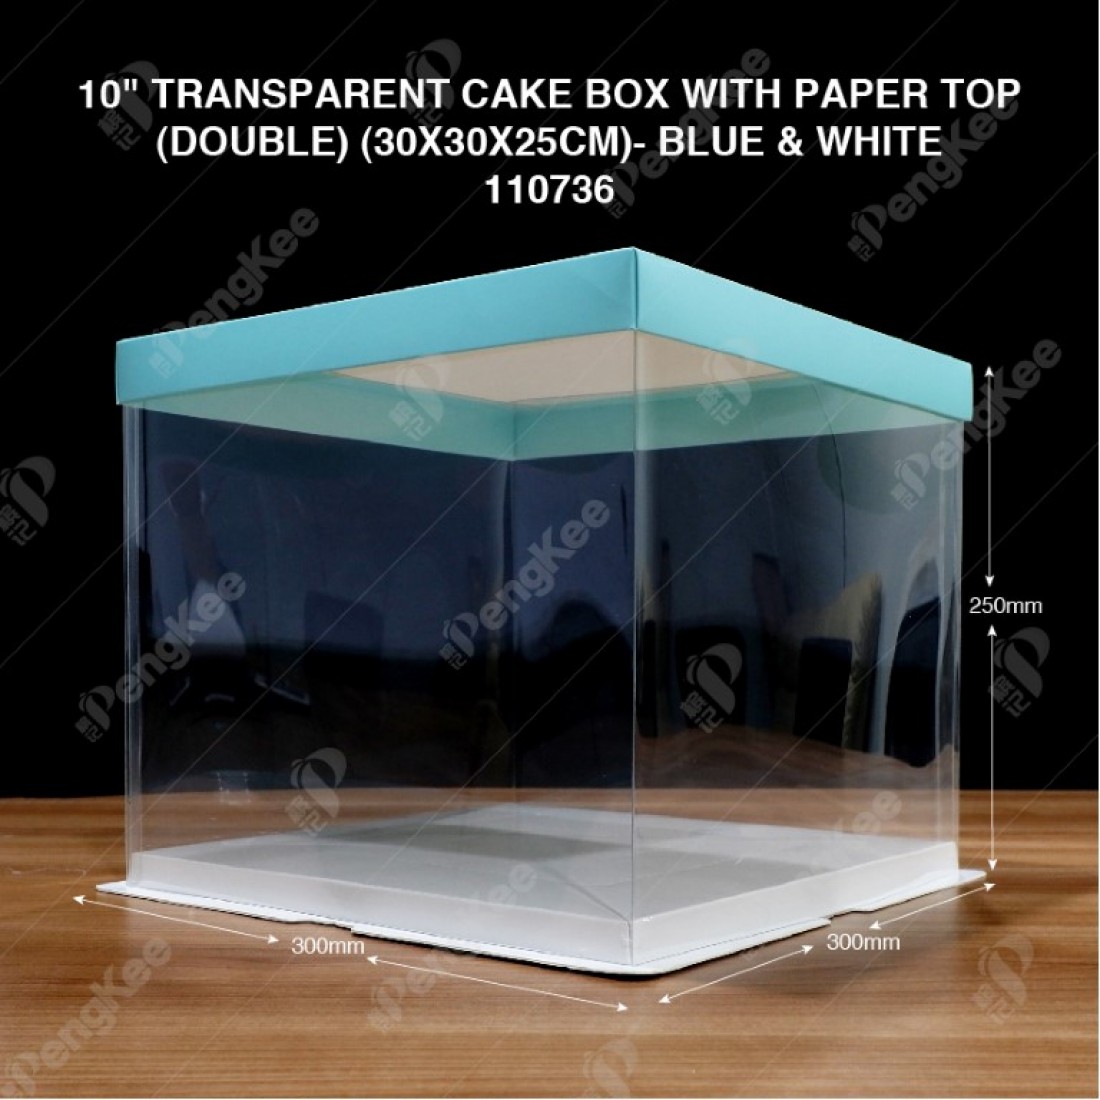 10" TRANSPARENT CAKE BOX WITH PAPER TOP(DOUBLE) (30*30*25CM)- BLUE & WHITE